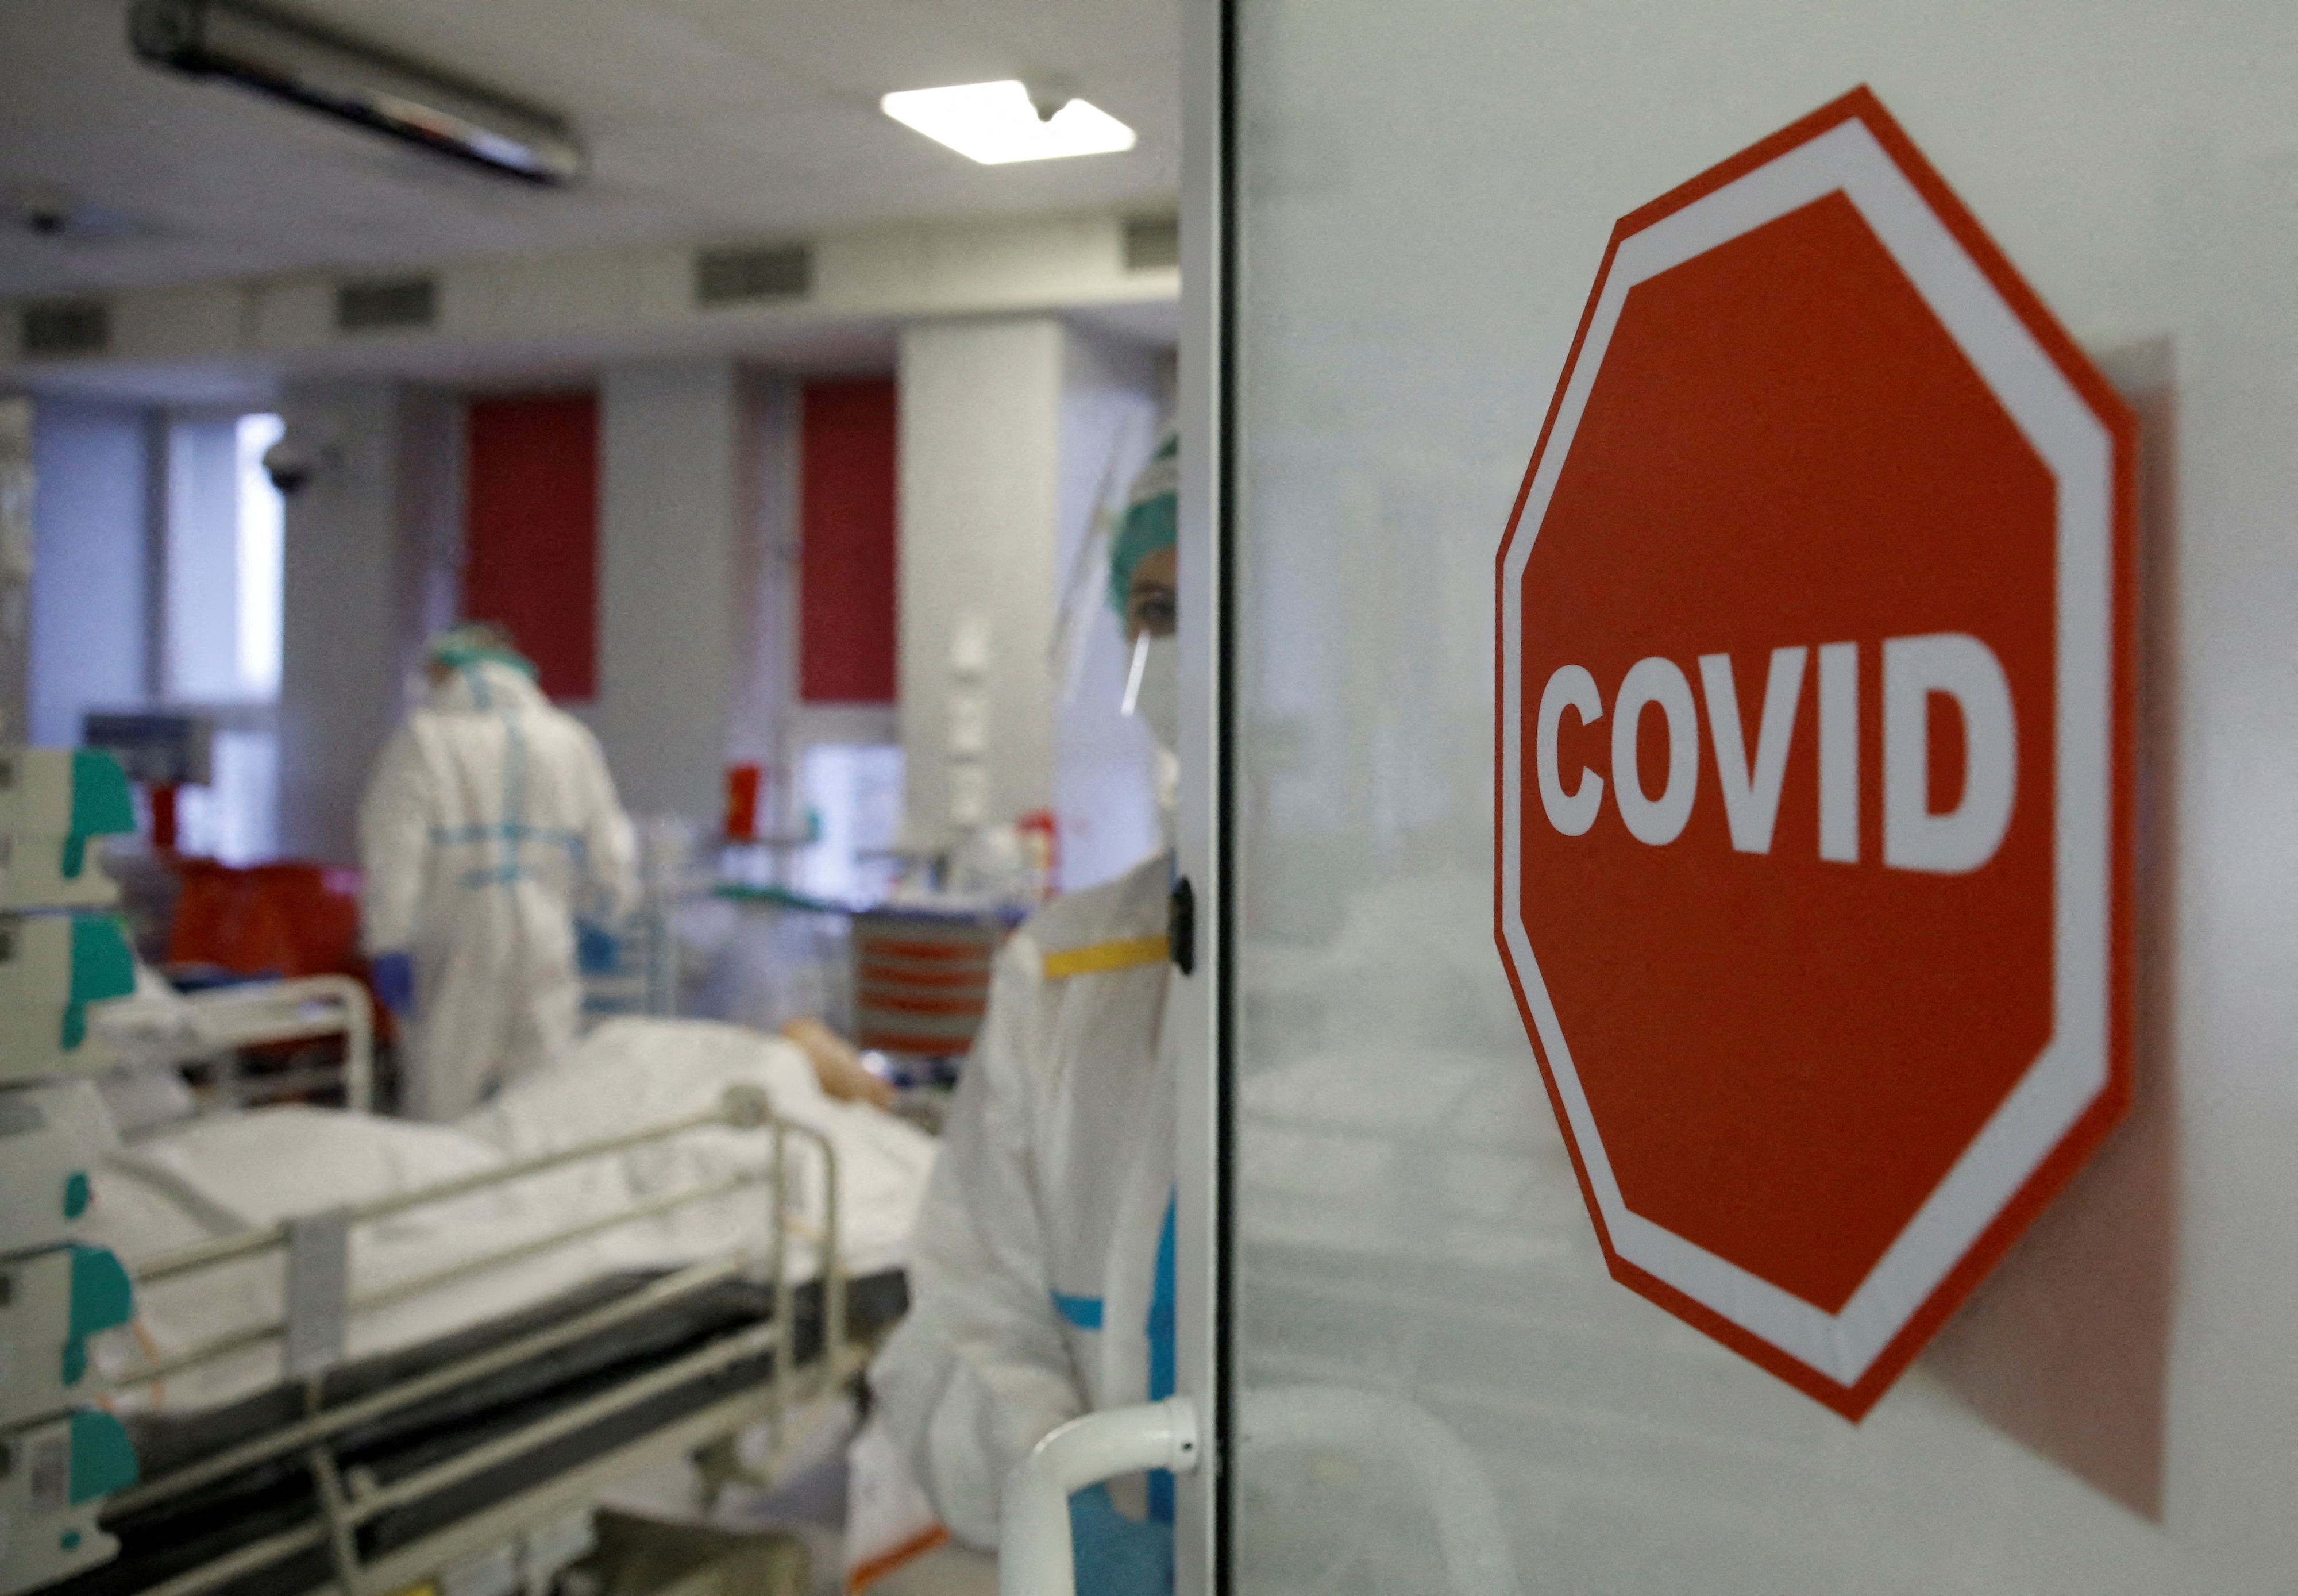 Medical staff members treat patients inside the coronavirus disease (COVID-19) ward at the Interior Ministry Hospital in Warsaw